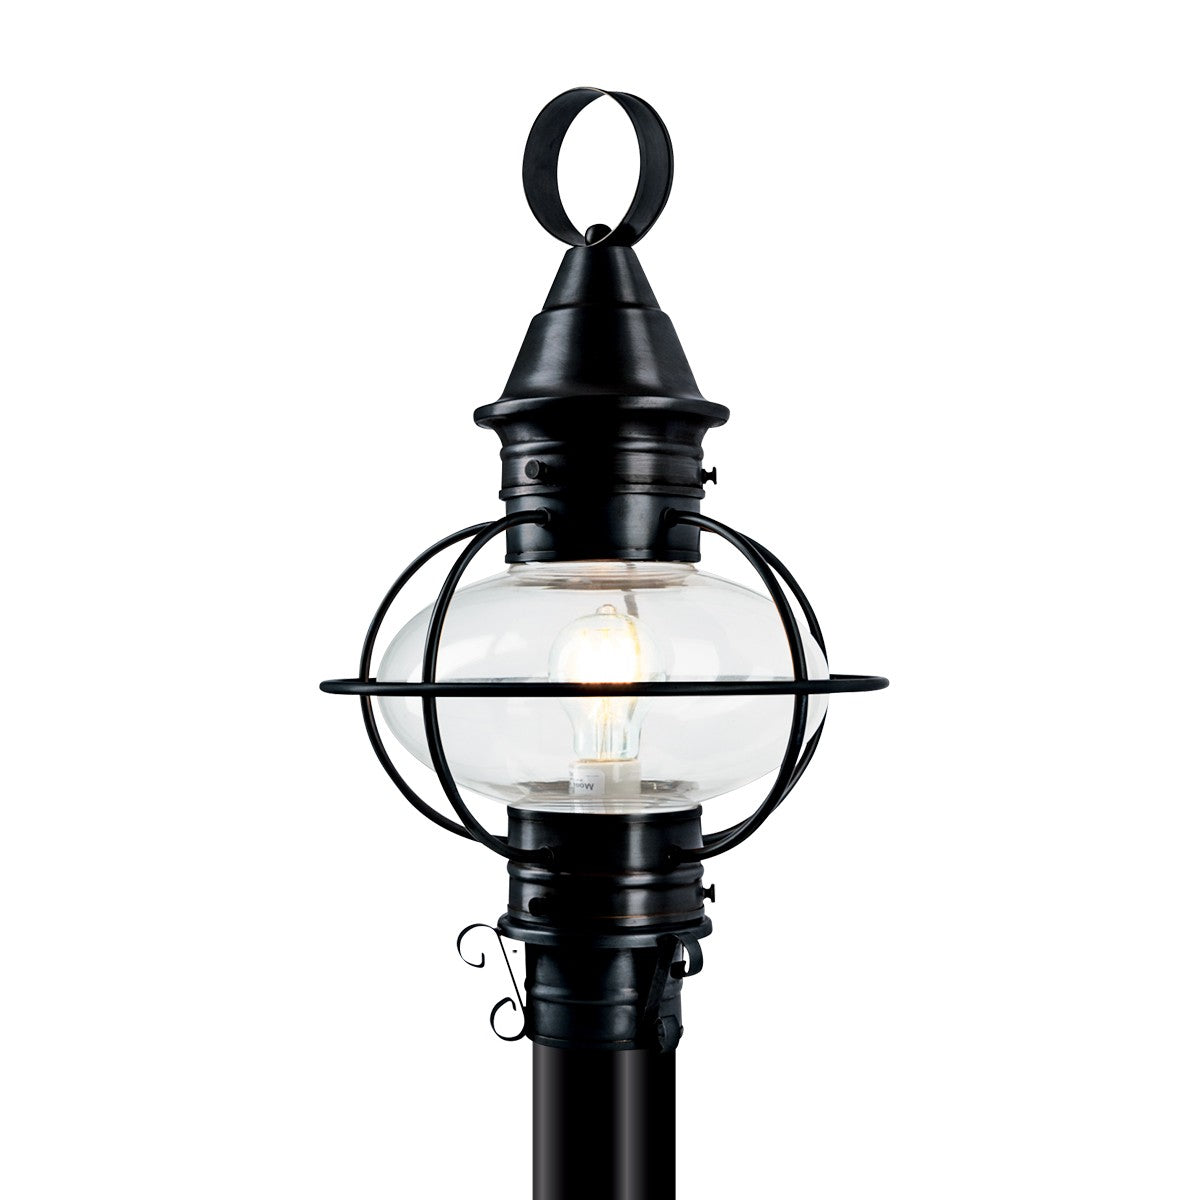 Norwell Lighting 1711-BL-CL American Onion One Light Post Mount Outdoor Black